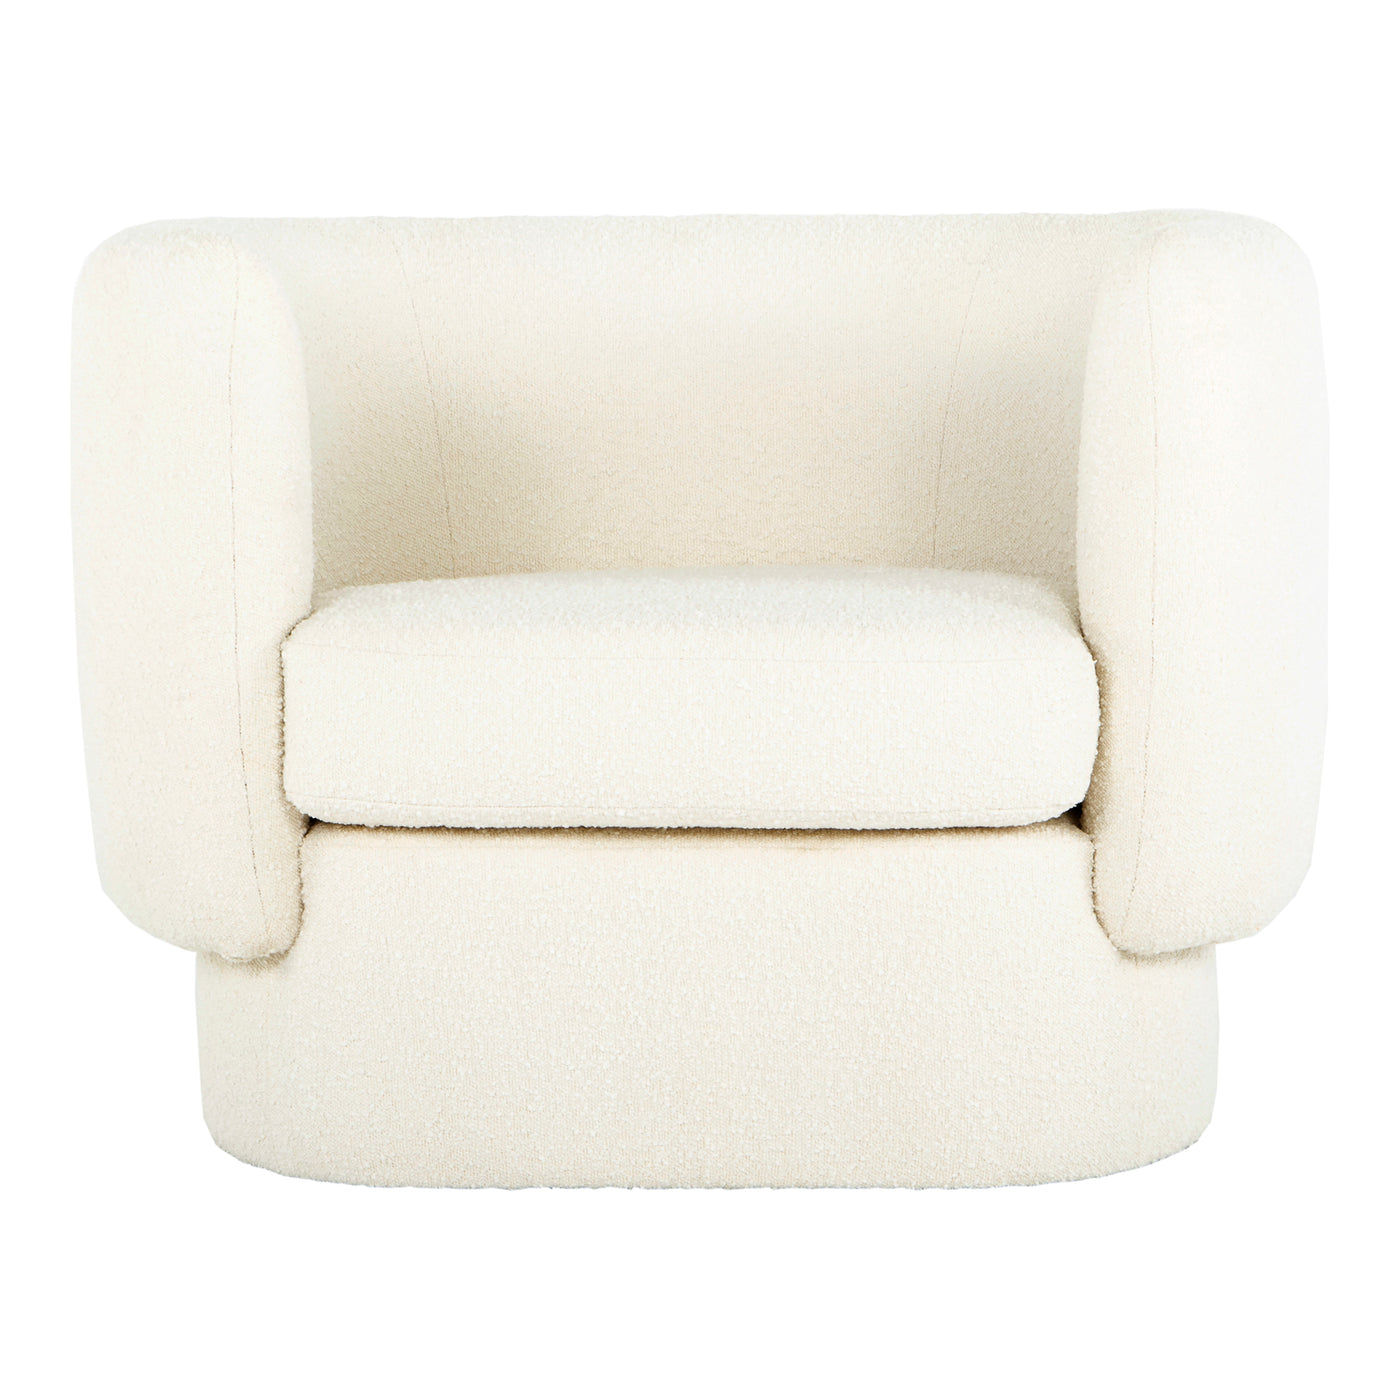 Like sitting on a cloud, the Koba chair comes in cream white with sumptuous form and curved lines. Foam filling, nozag spr...